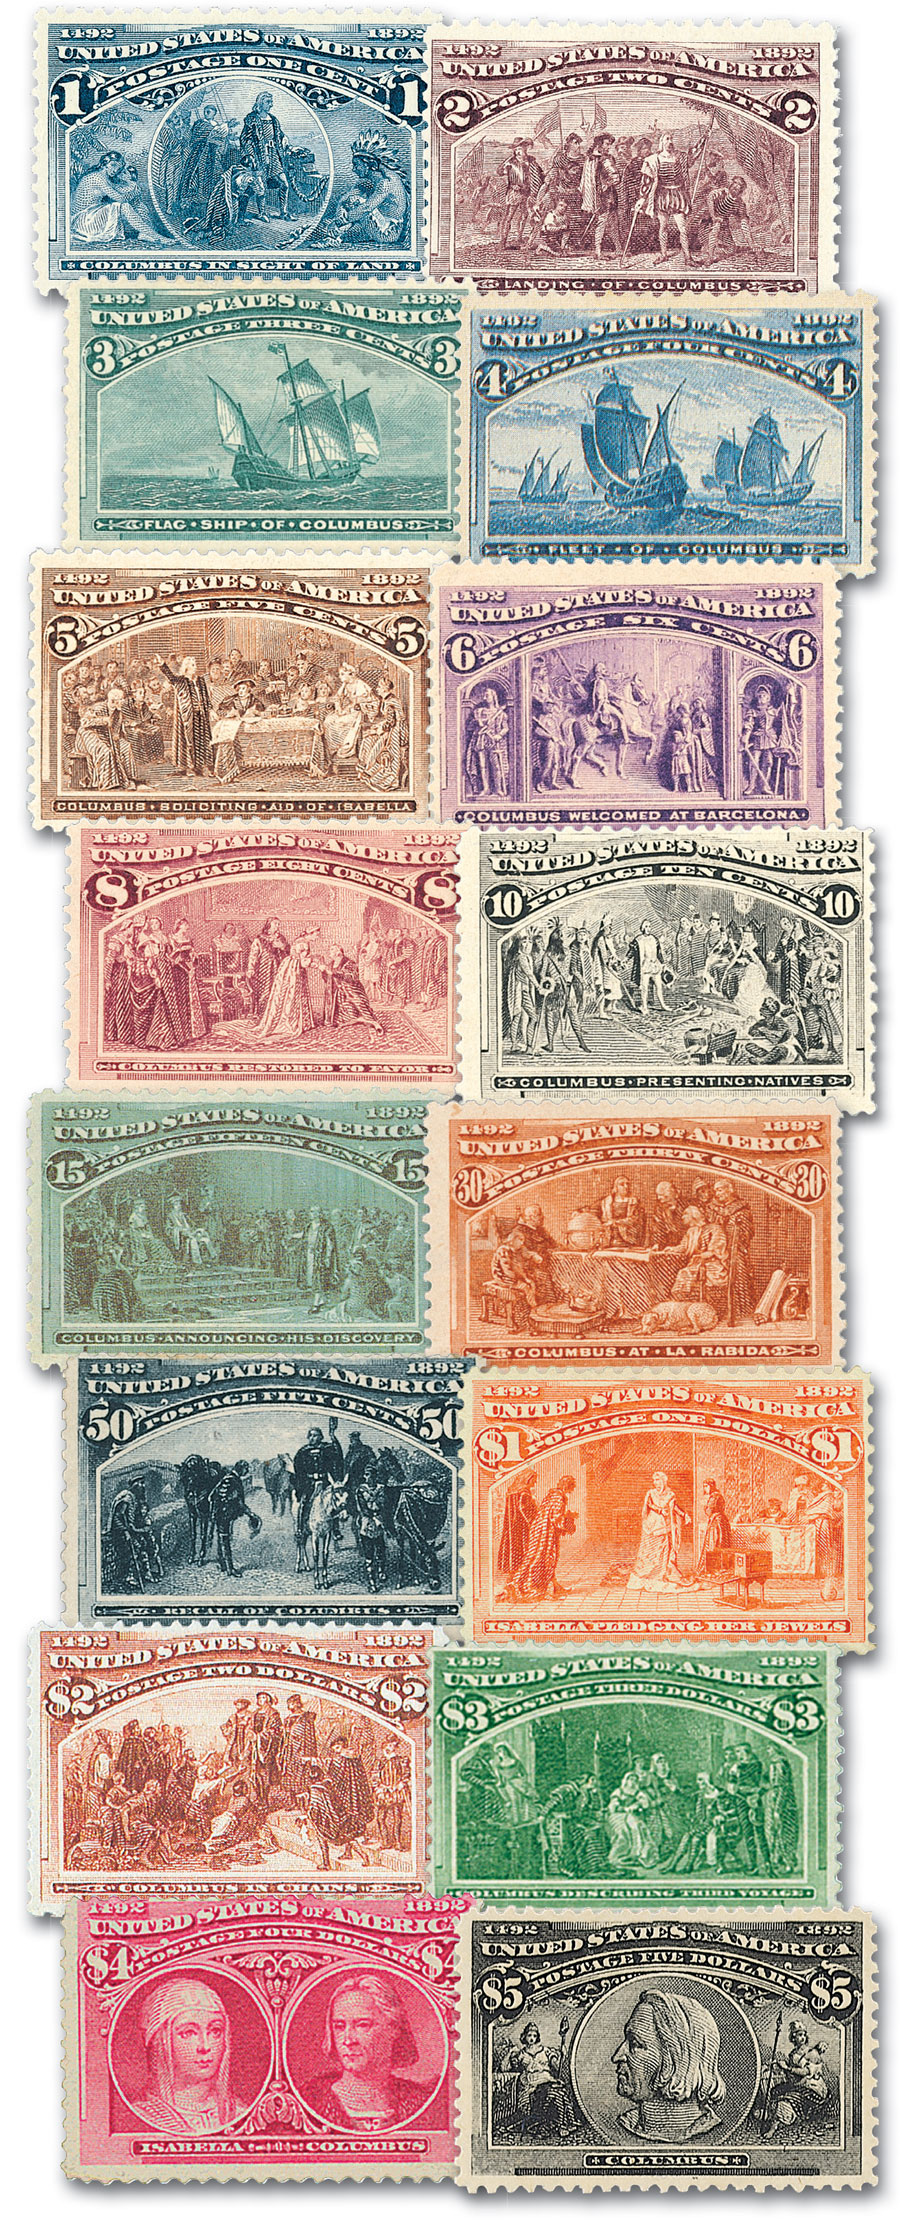 Complete Set of Columbian Stamps